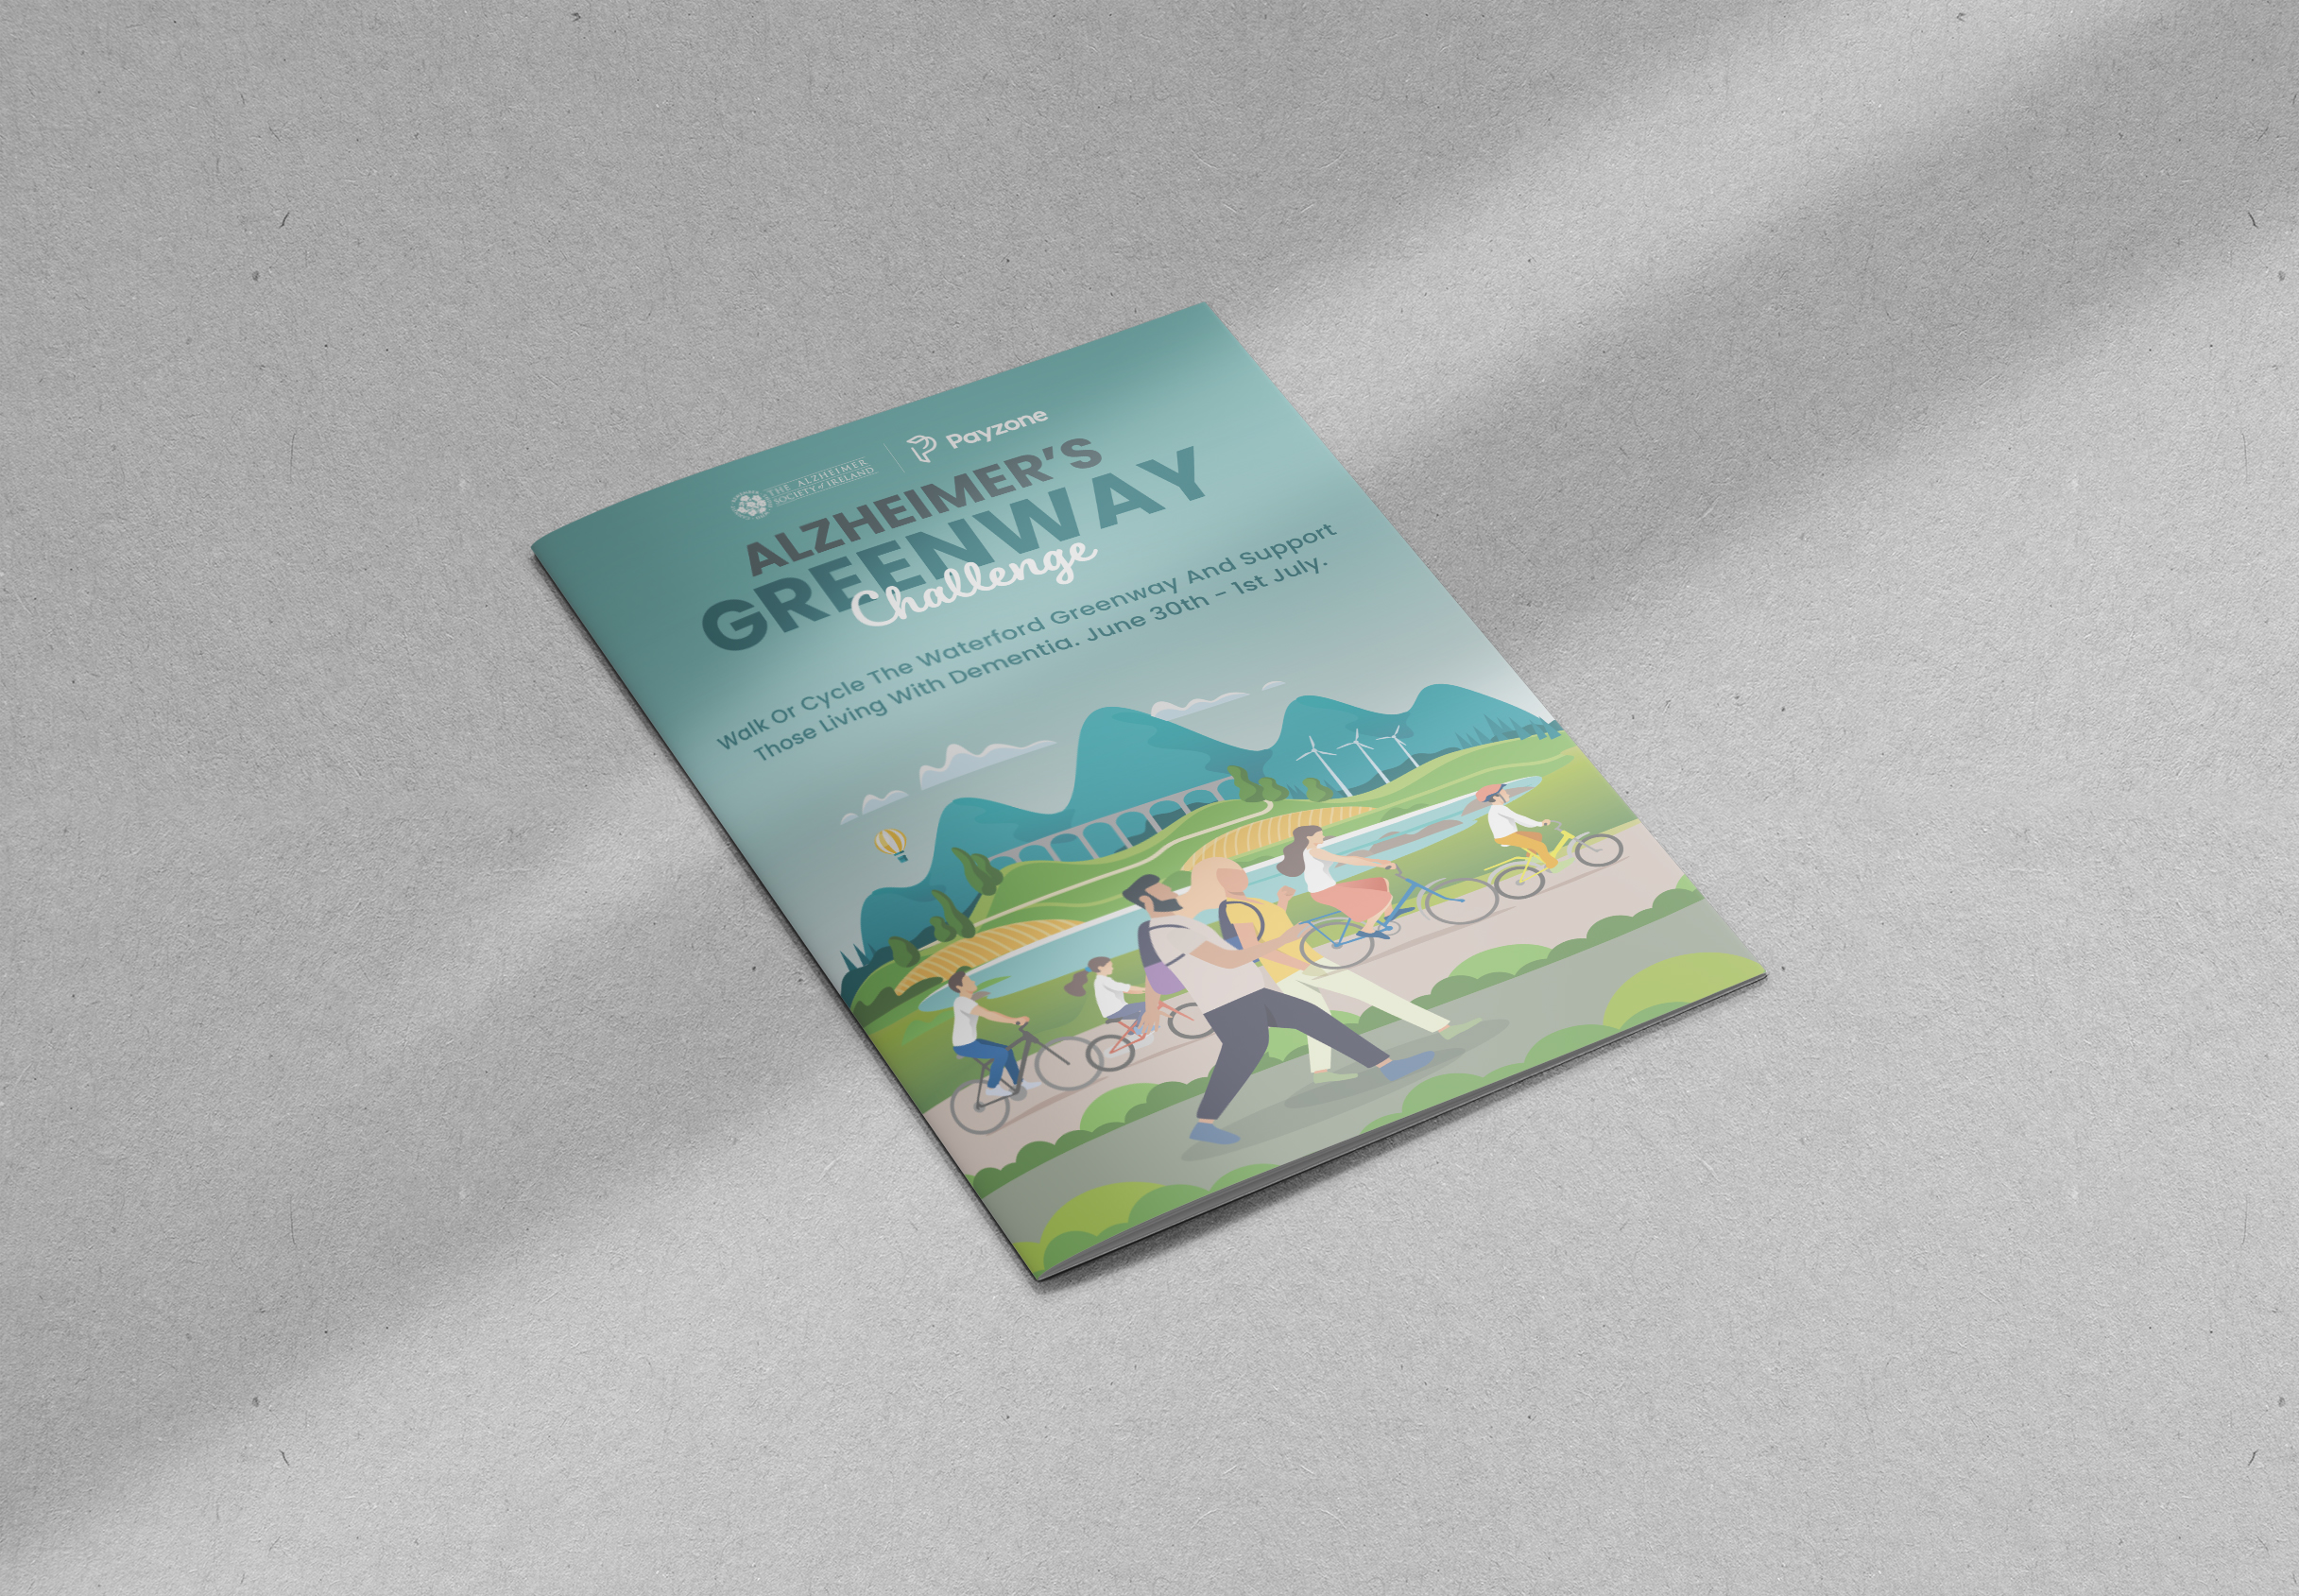 06 ALZHEIMERS SOCIETY - Greenway Challenge Booklet